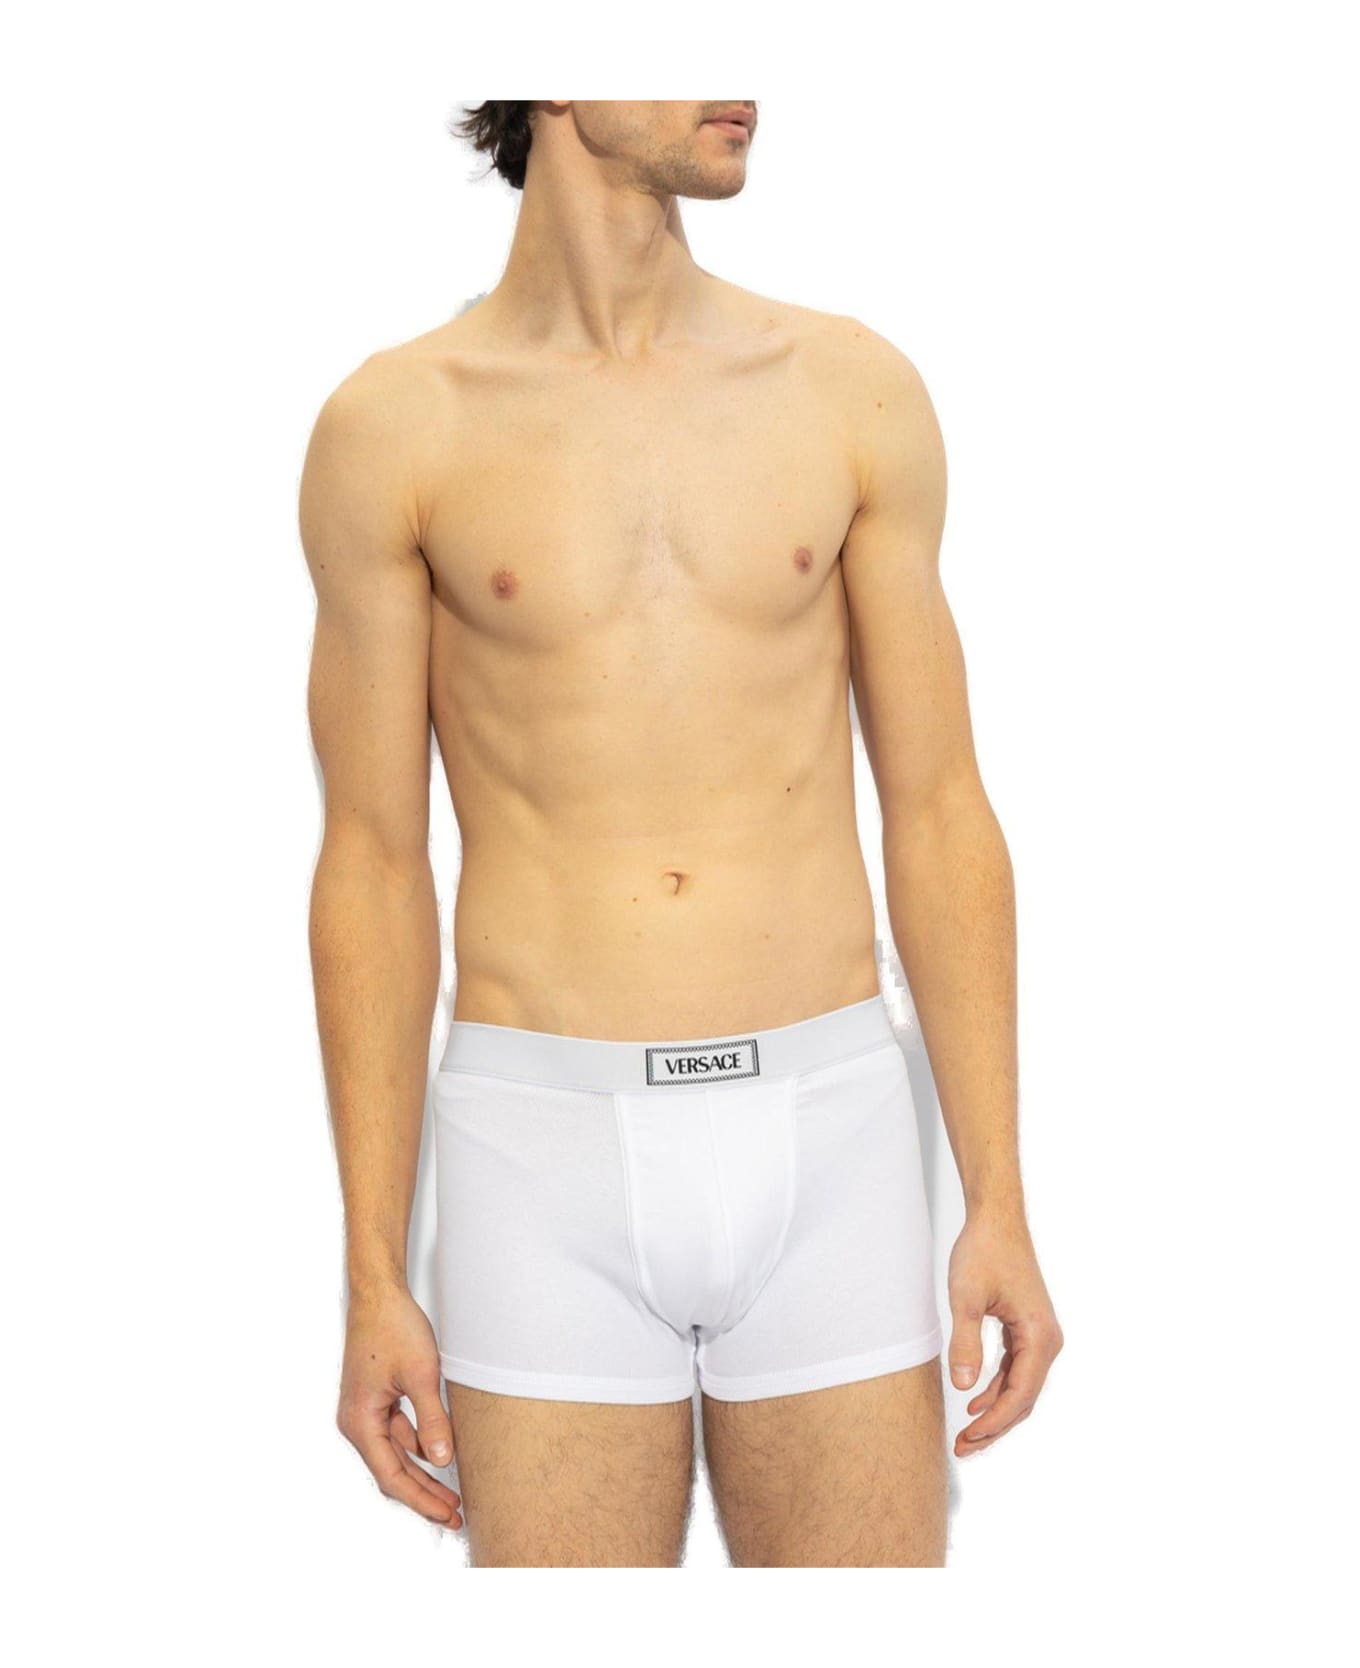 Versace 90s Logo-waistband Stretched Boxer Briefs - OPTICAL WHITE